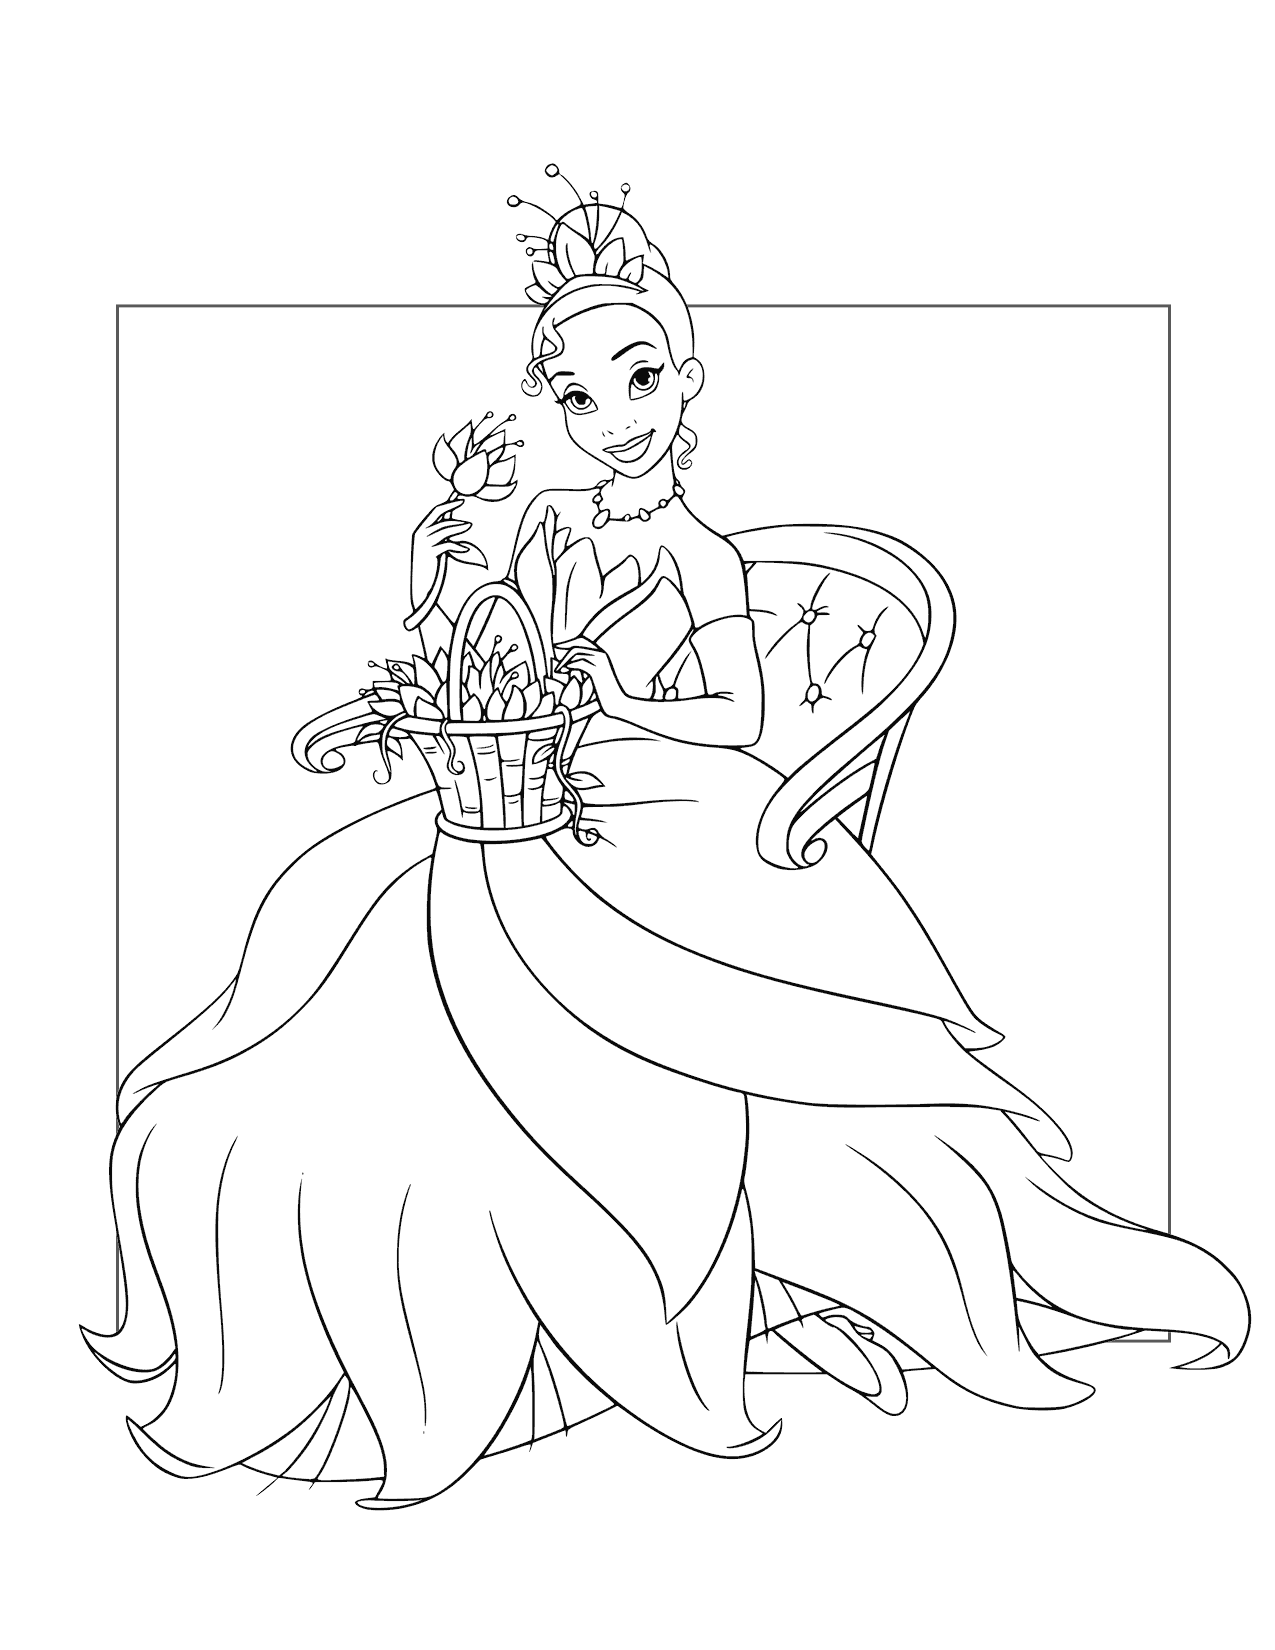 Princess Tiana Has A Basket Of Flowers Coloring Page